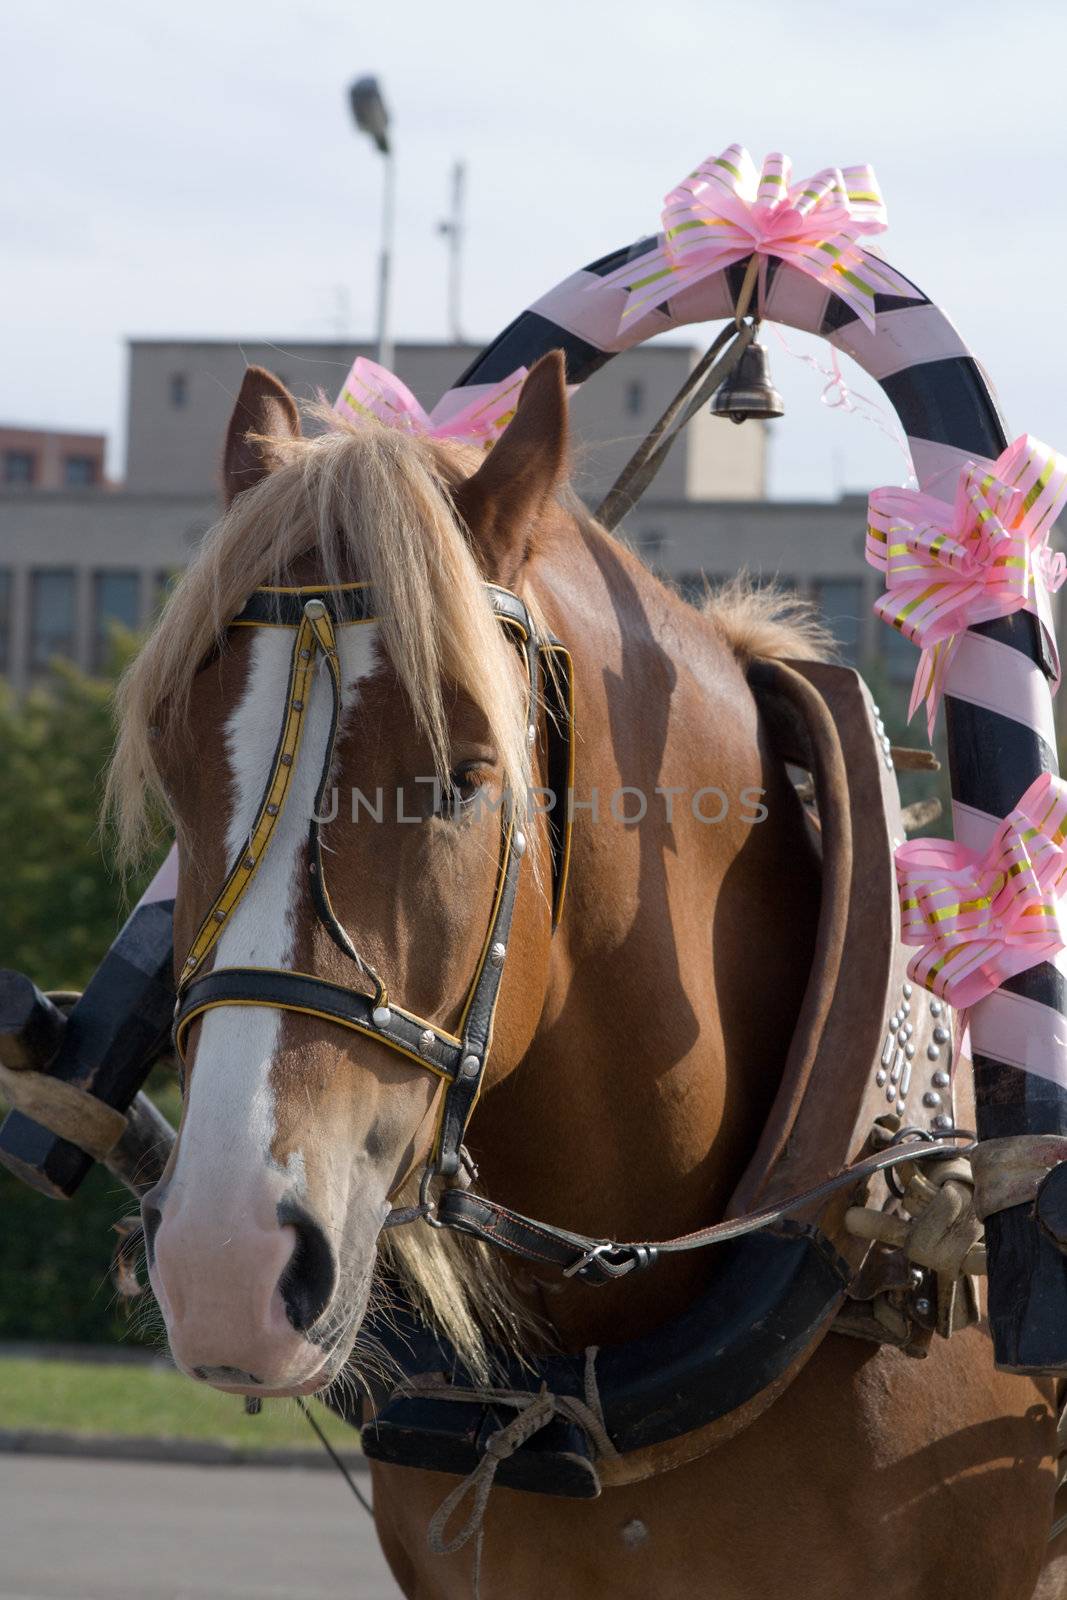 The decorated horse in a harness. by ISerg